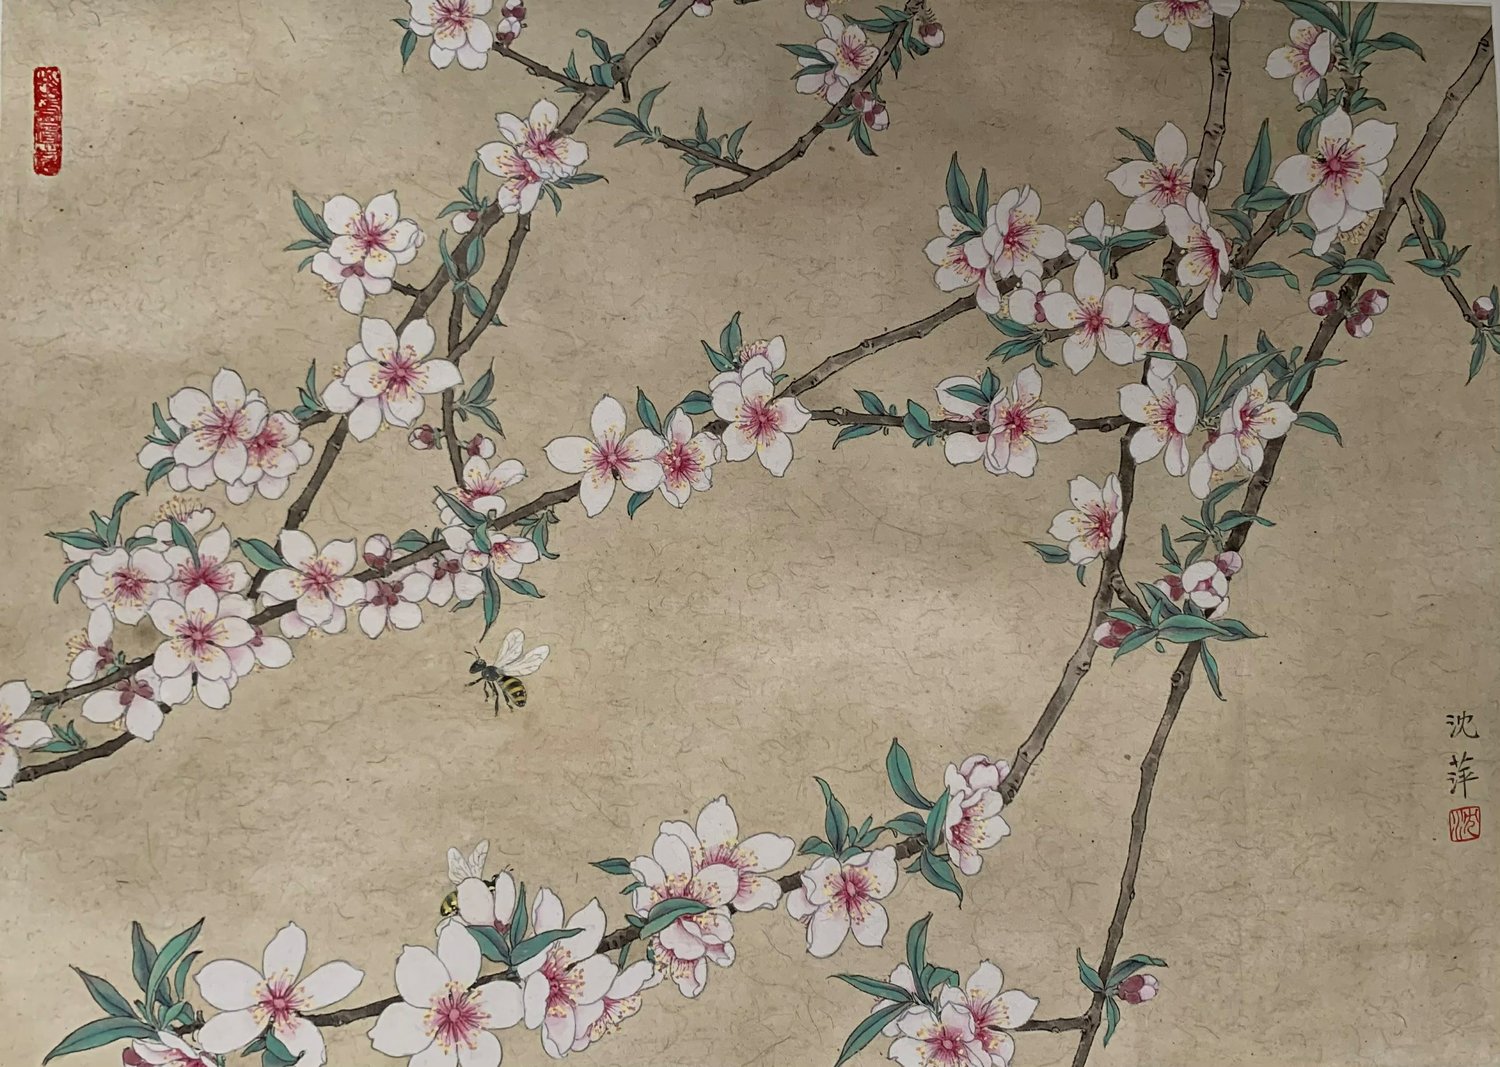 “Apple Blossoms” was made with colors on rice paper.